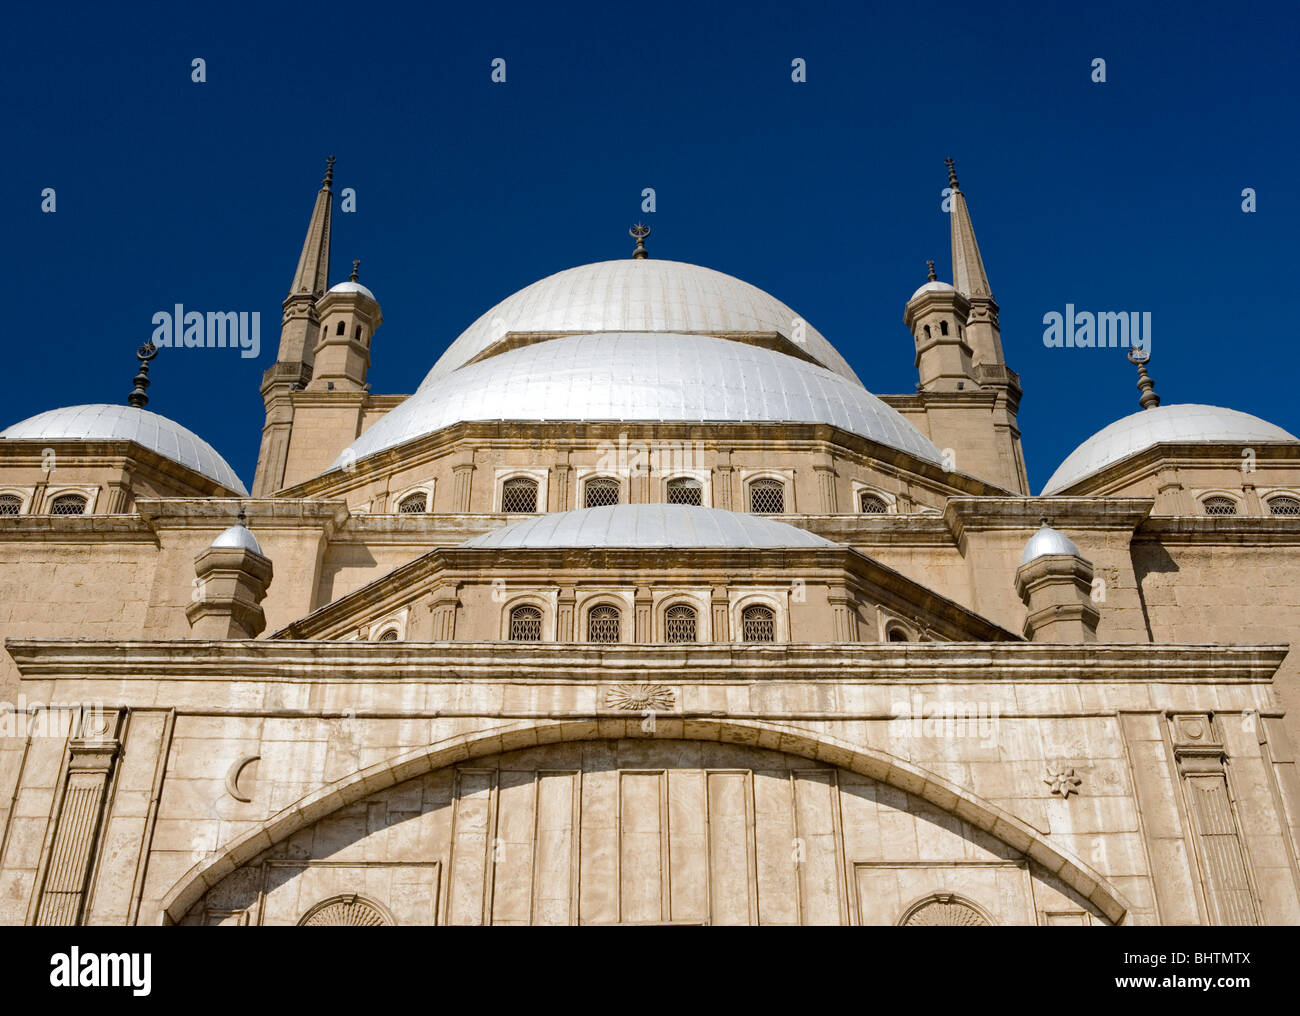 Mohamed Ali Mosque in the Saladin Citadel of Cairo, Egypt. Stock Photo